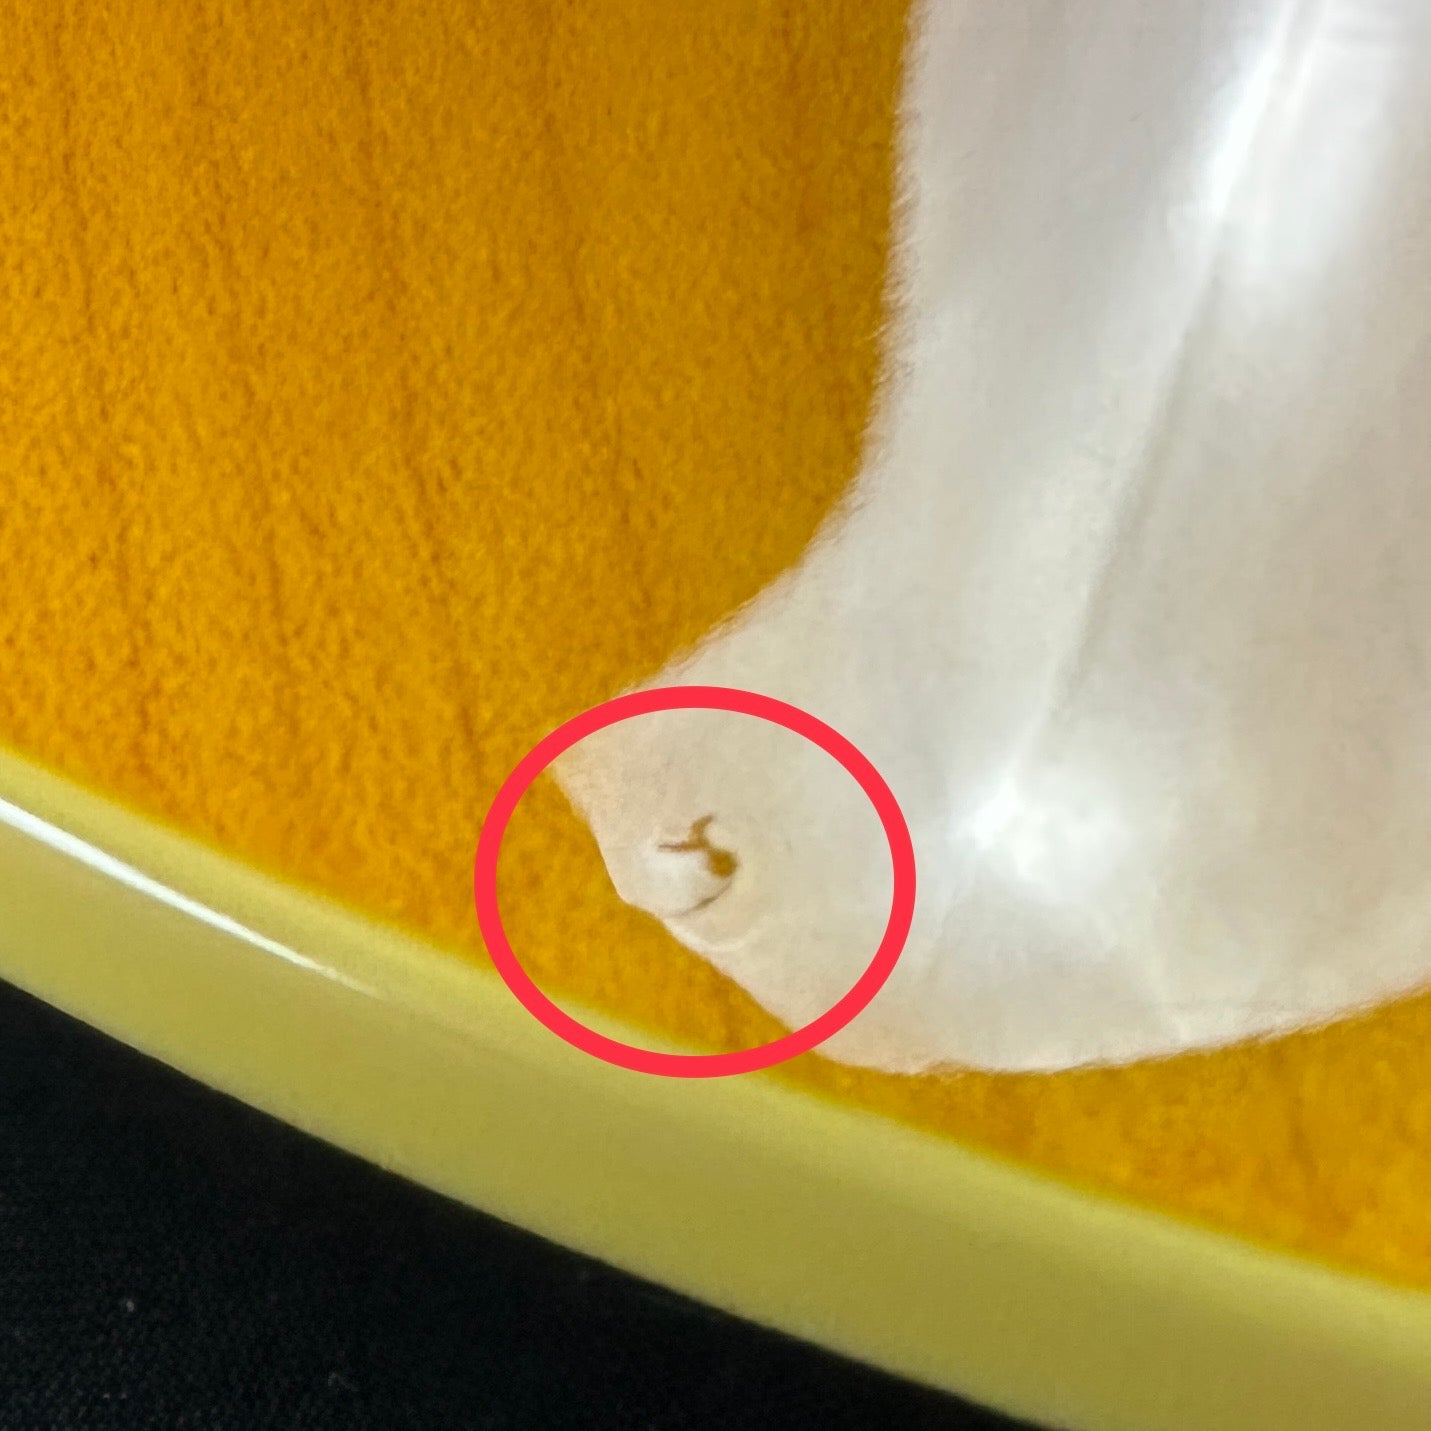 Small ding on front of body near the bottom.